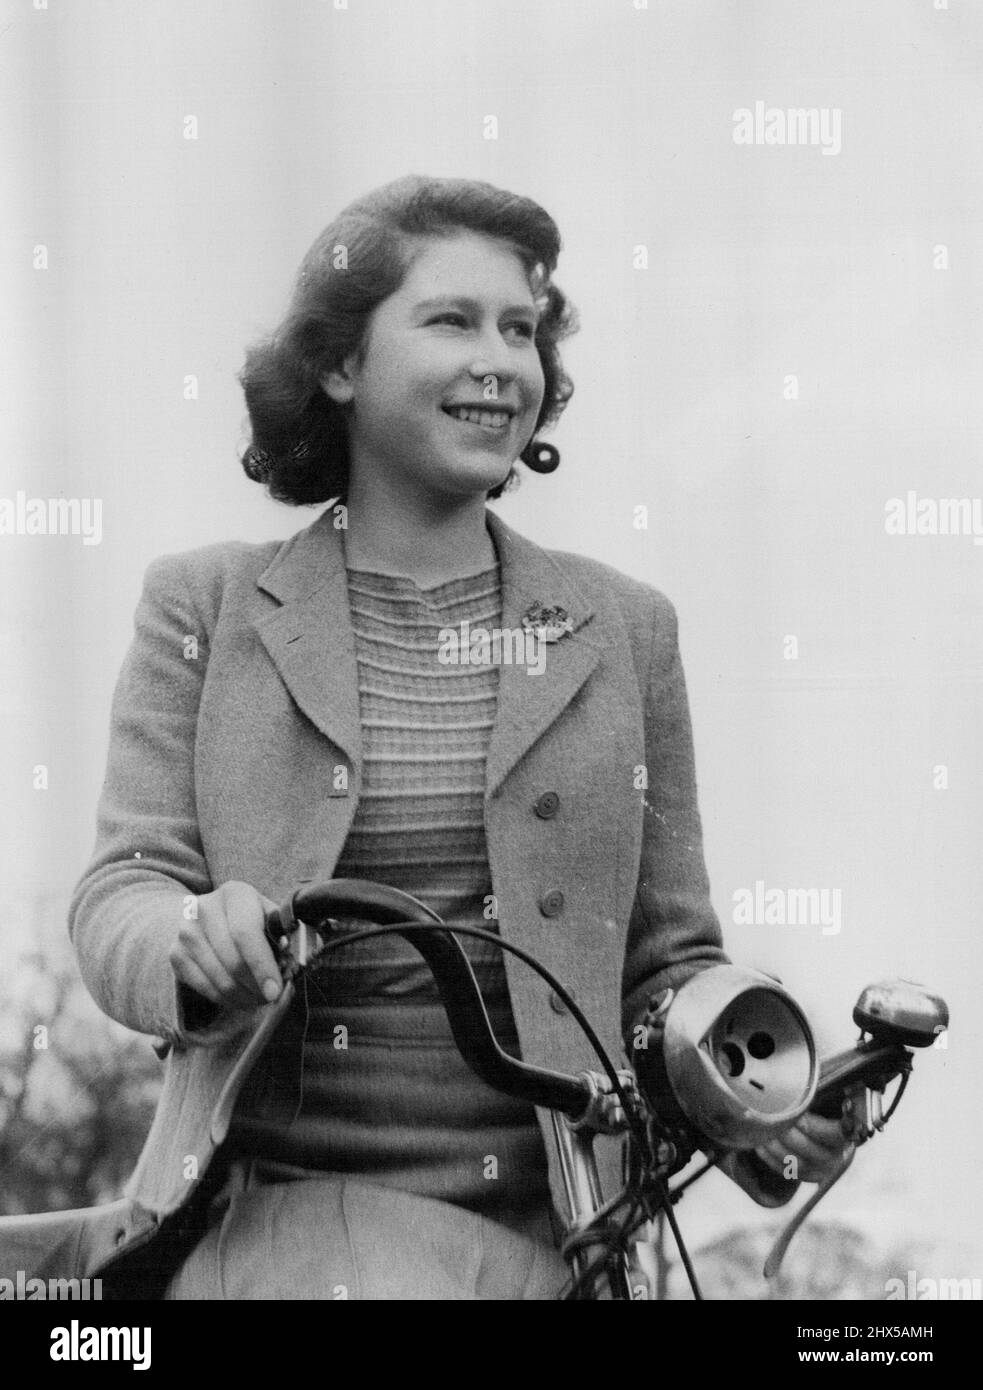 Royal Lodge Windsor April 11th 1942. - Queen Elizabeth with bicycle. June 16, 1953. (Photo by Camera Press Ltd.). Stock Photo